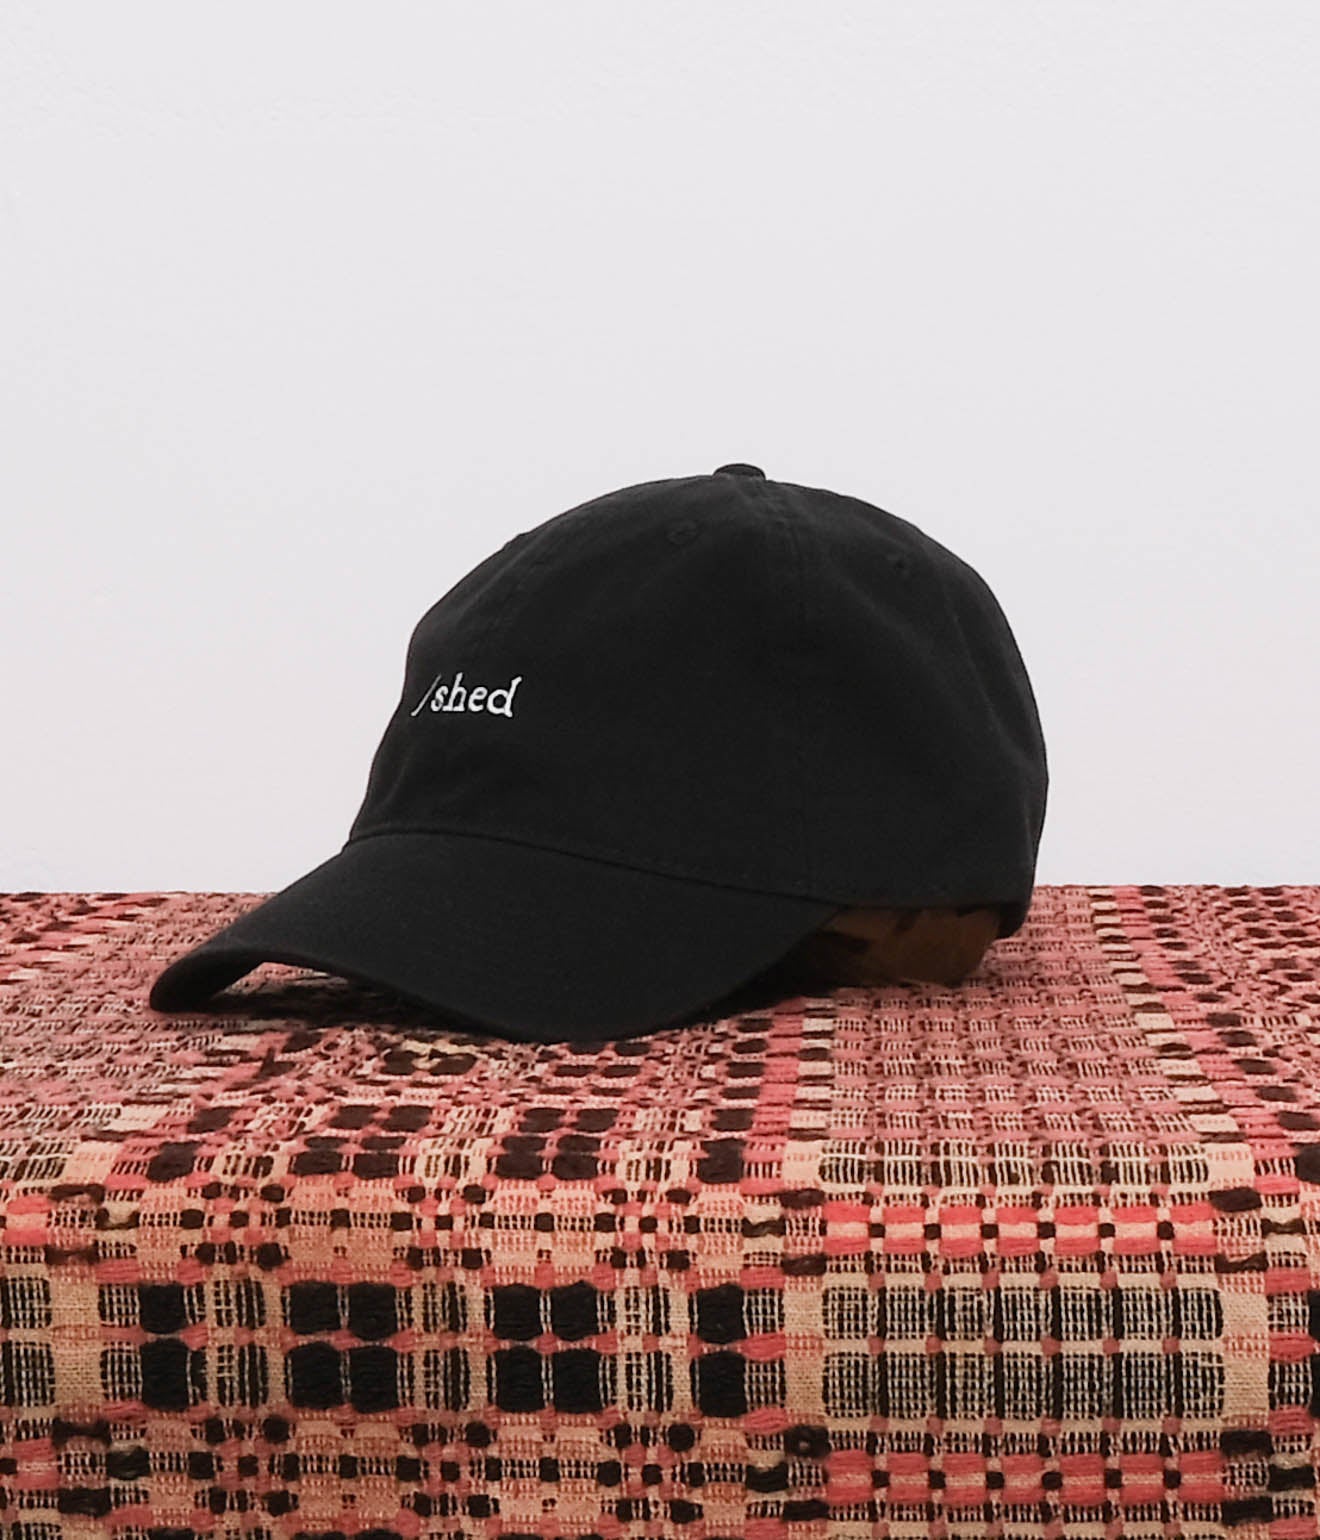 / Shed "/ Shed Project  Cap" (Black)